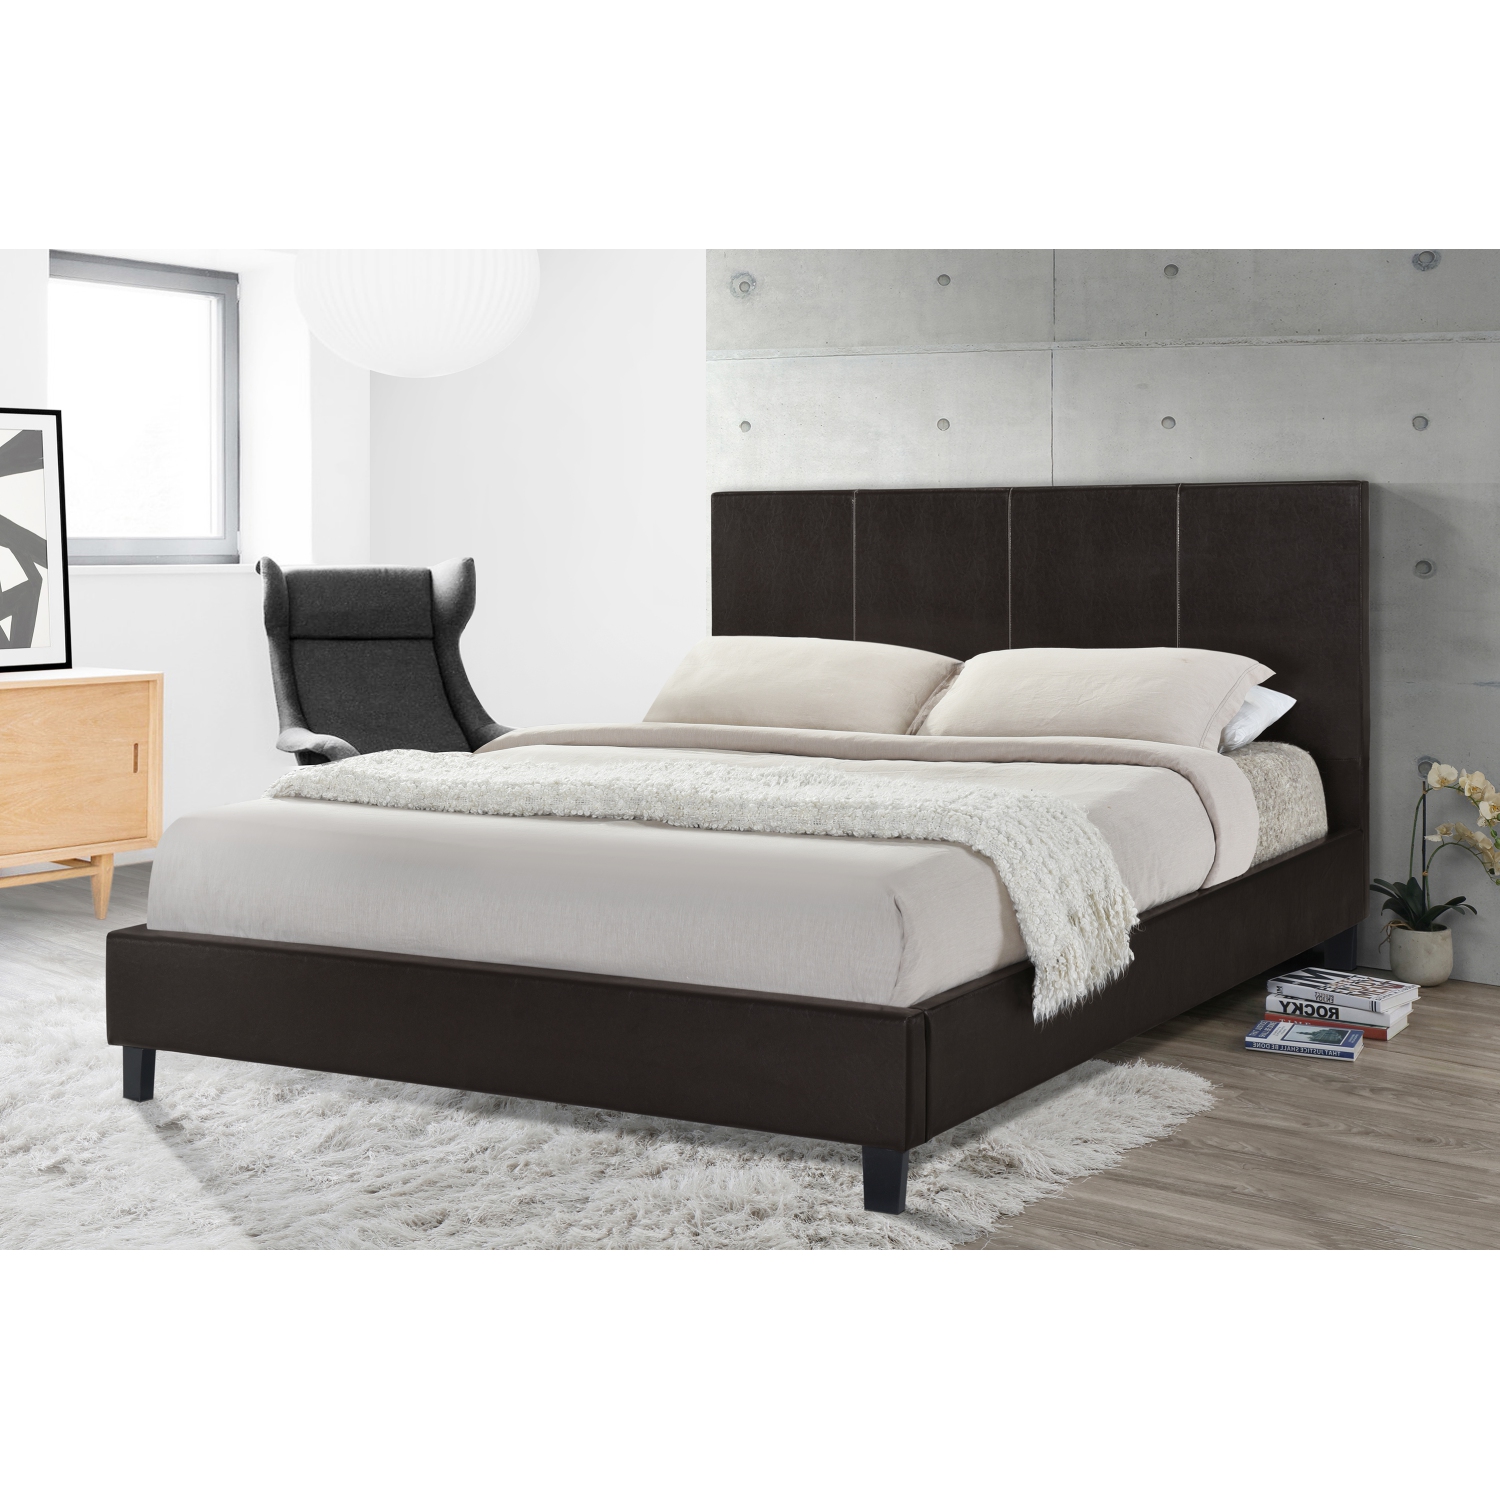 Espresso Uptown PU Upholstered KING Size Platform Bed (No Box Spring Required)